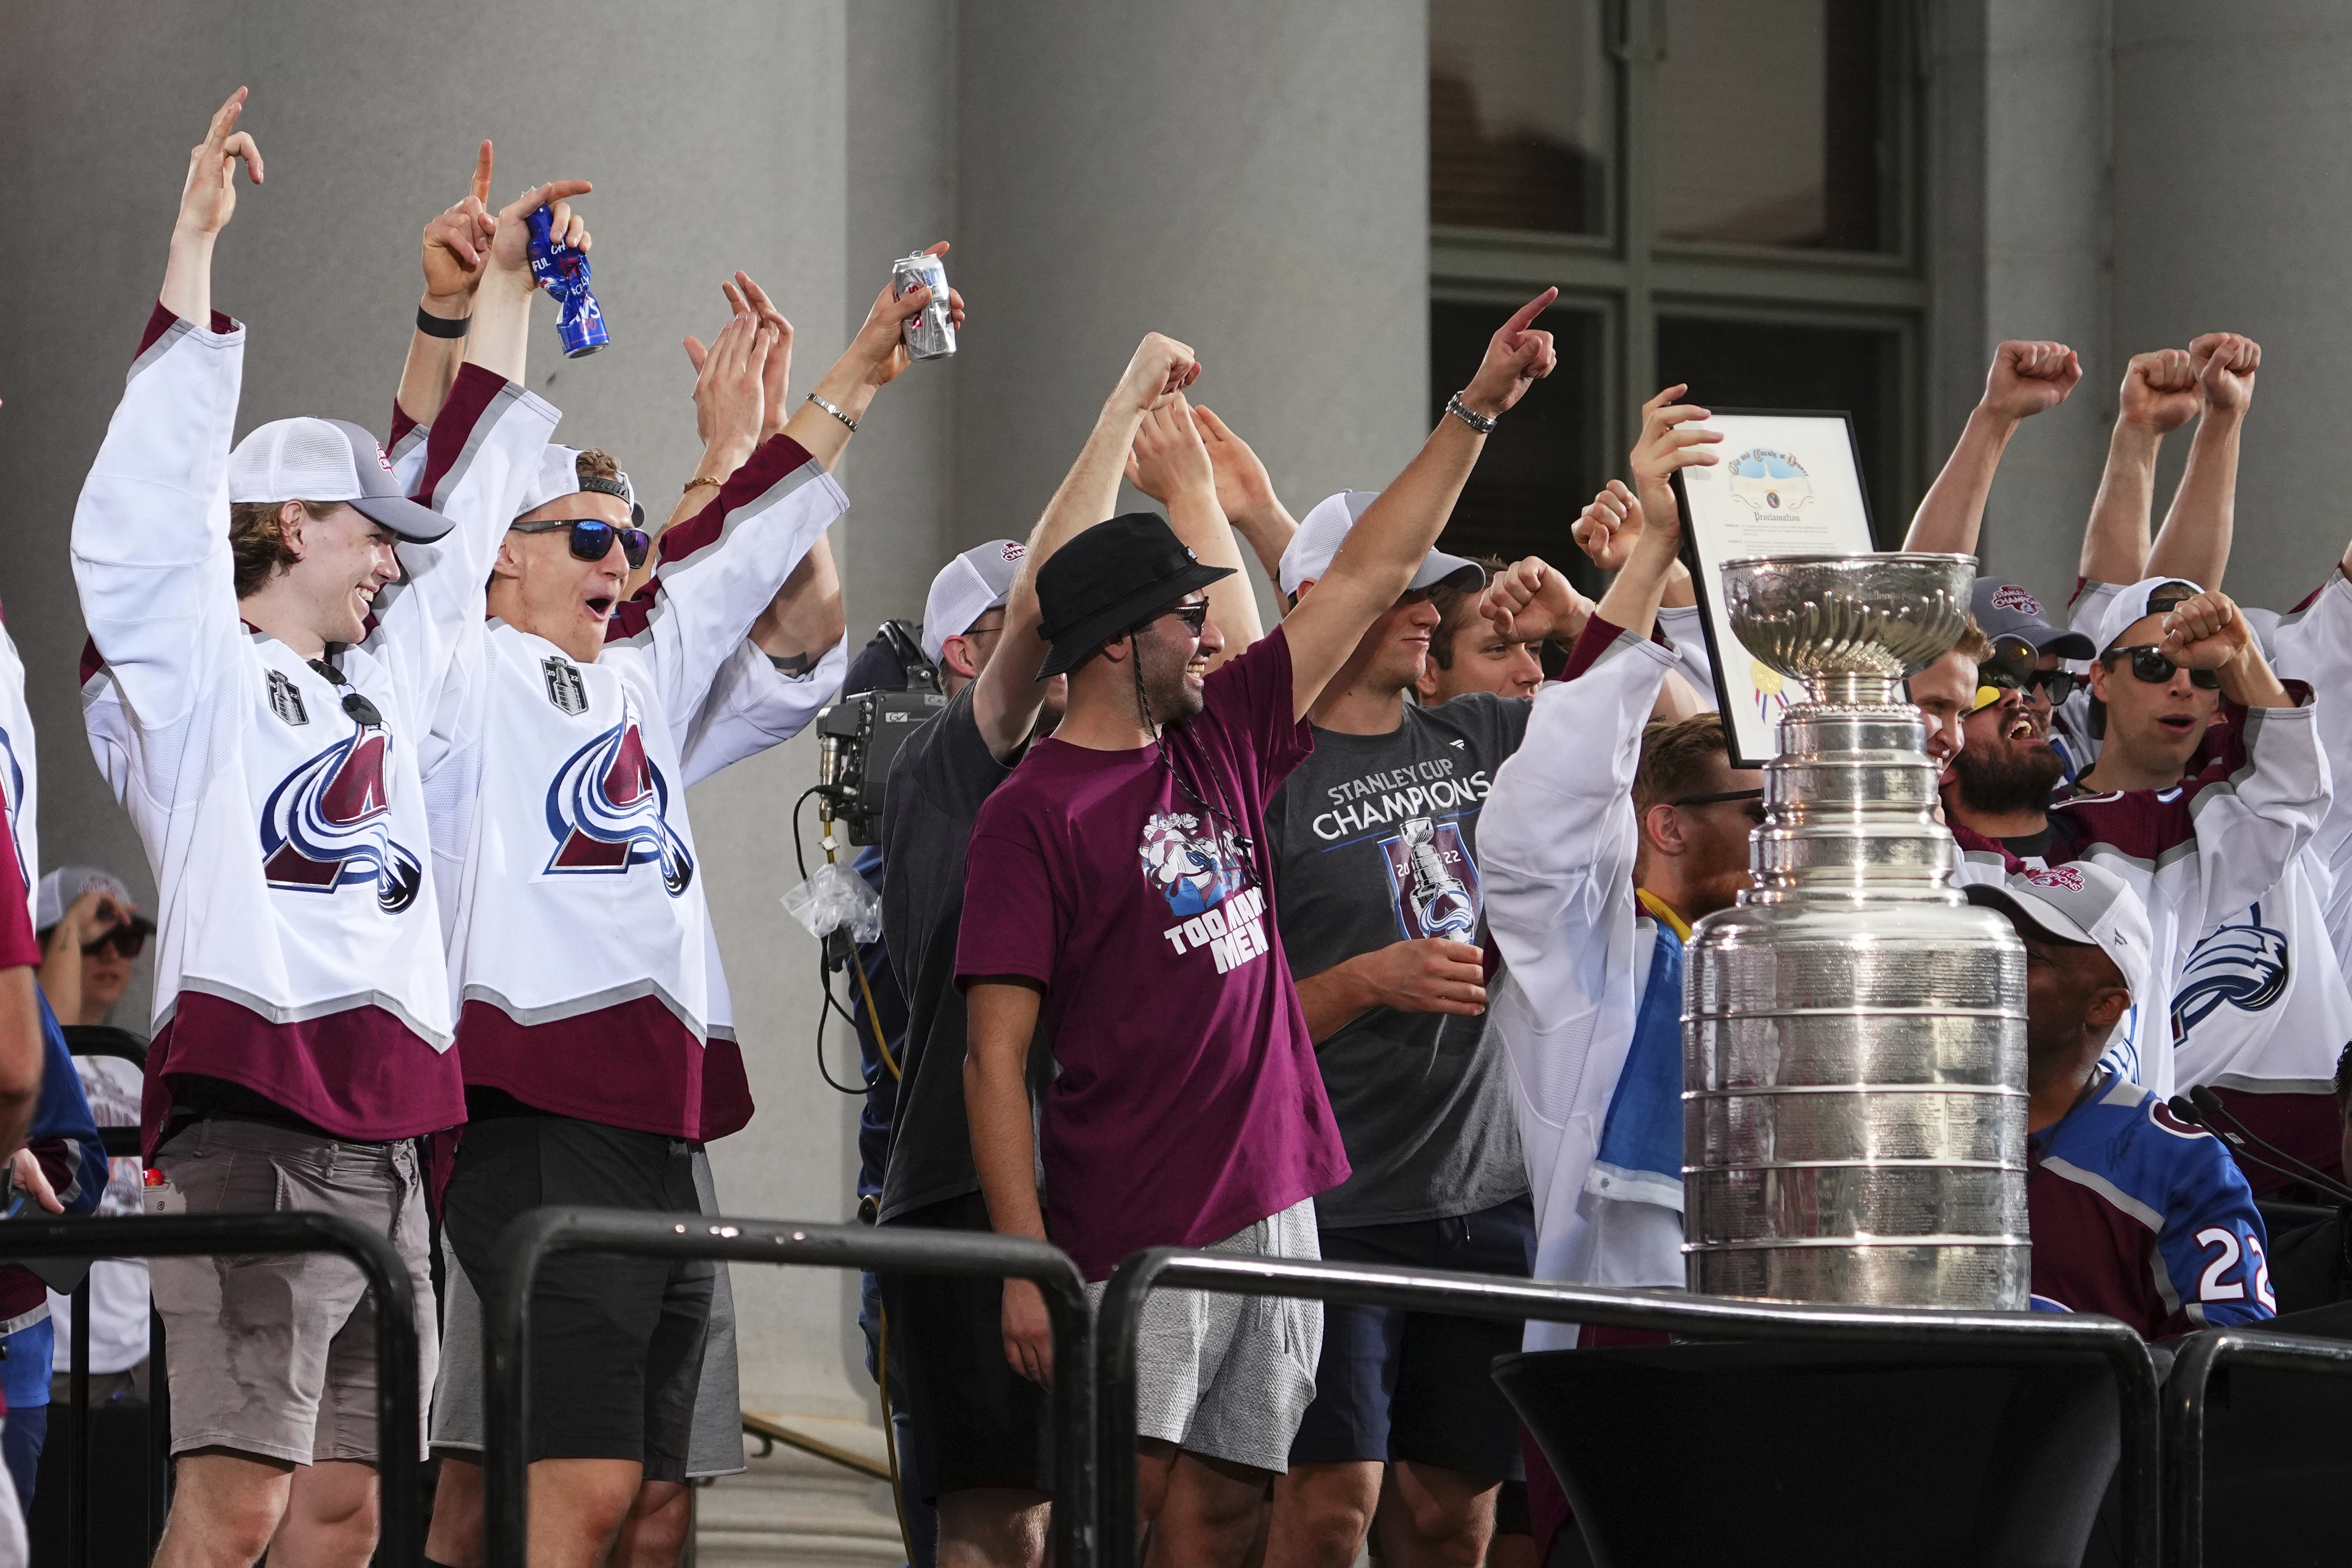 After parade, work begins for Avs in bid to repeat as champs